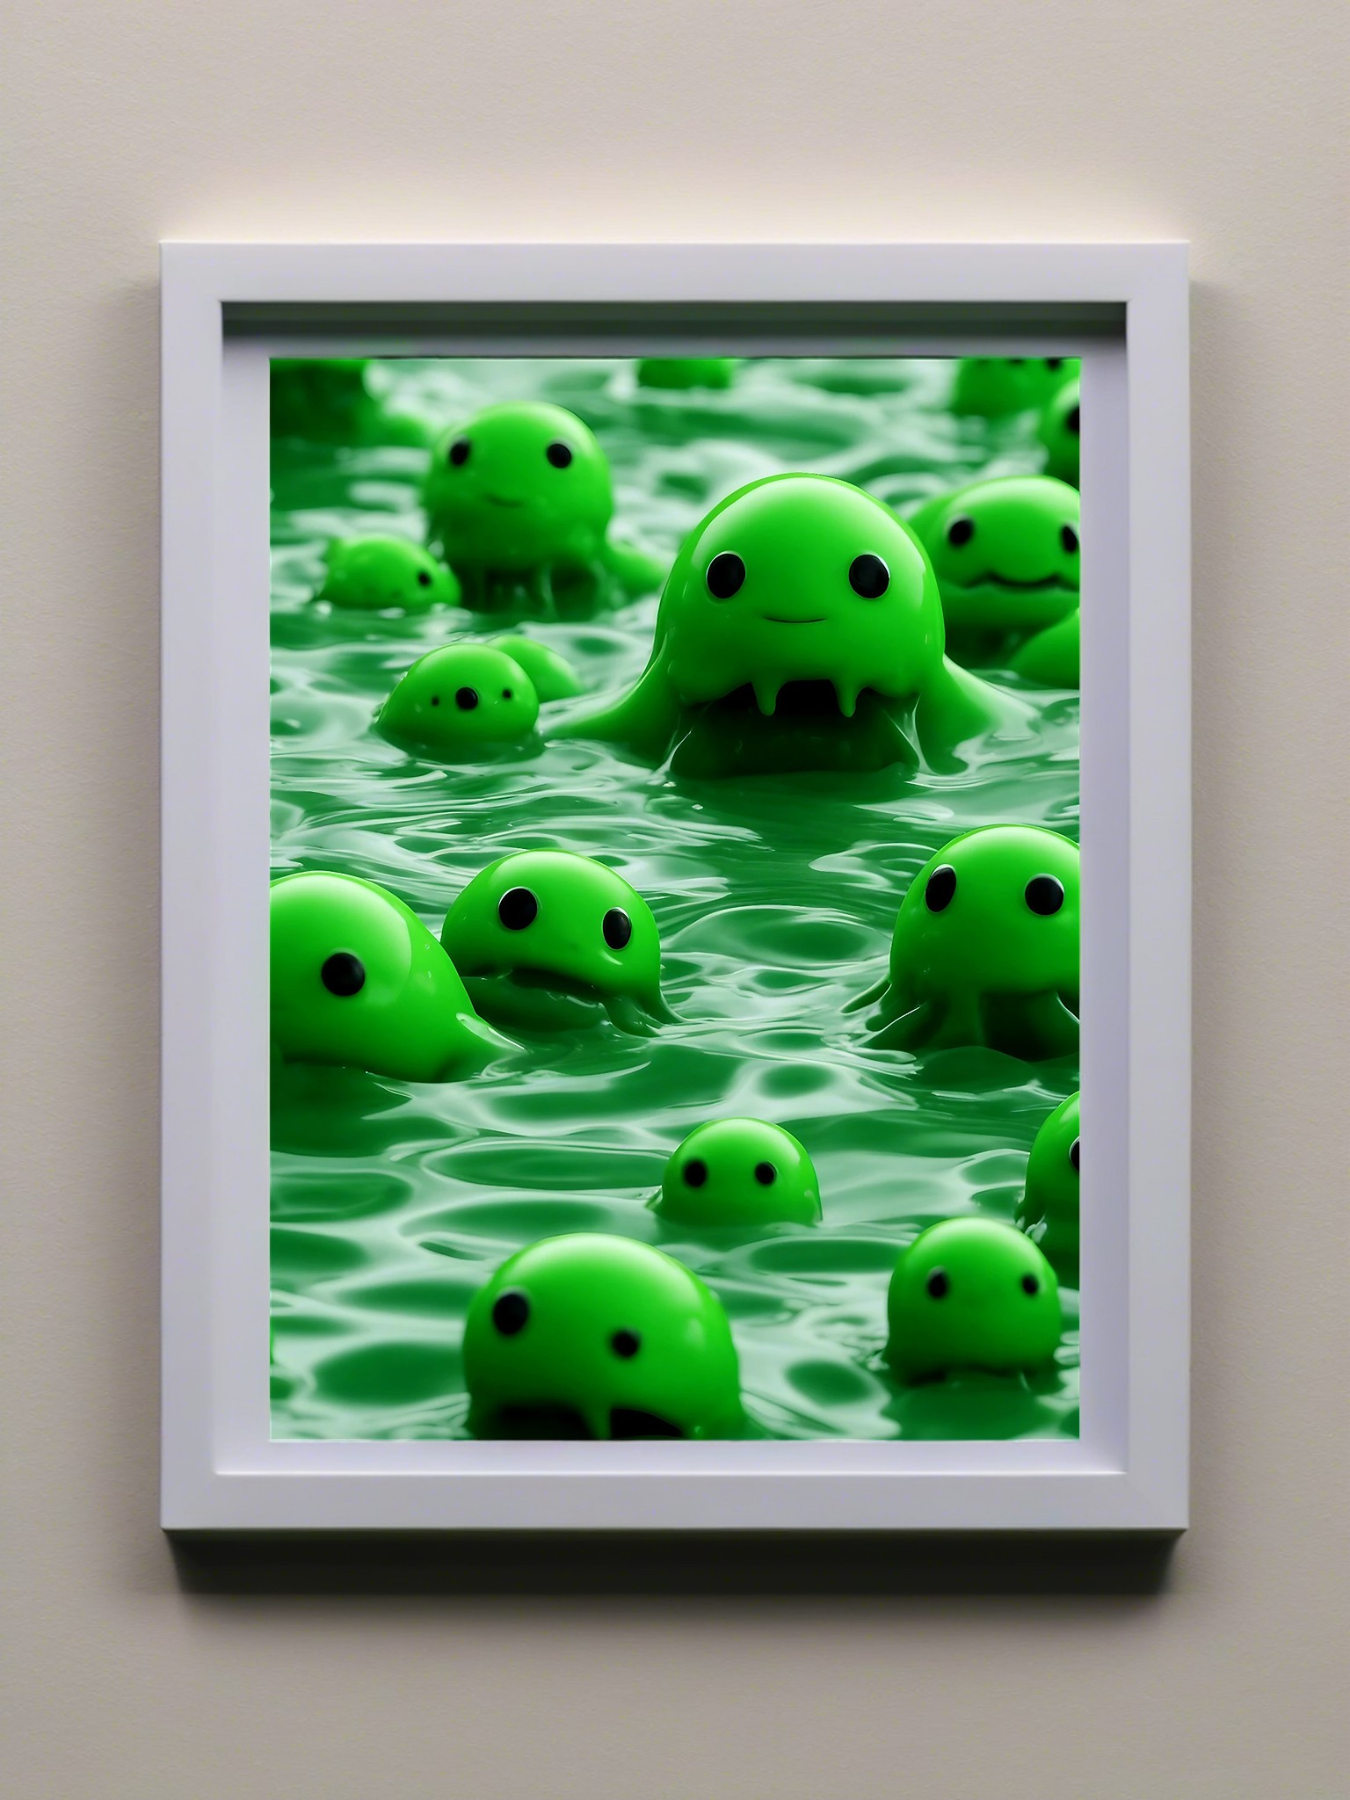 More cute green slime monsters in the lake - fantasy mini photo poster - 27x20 cm 2